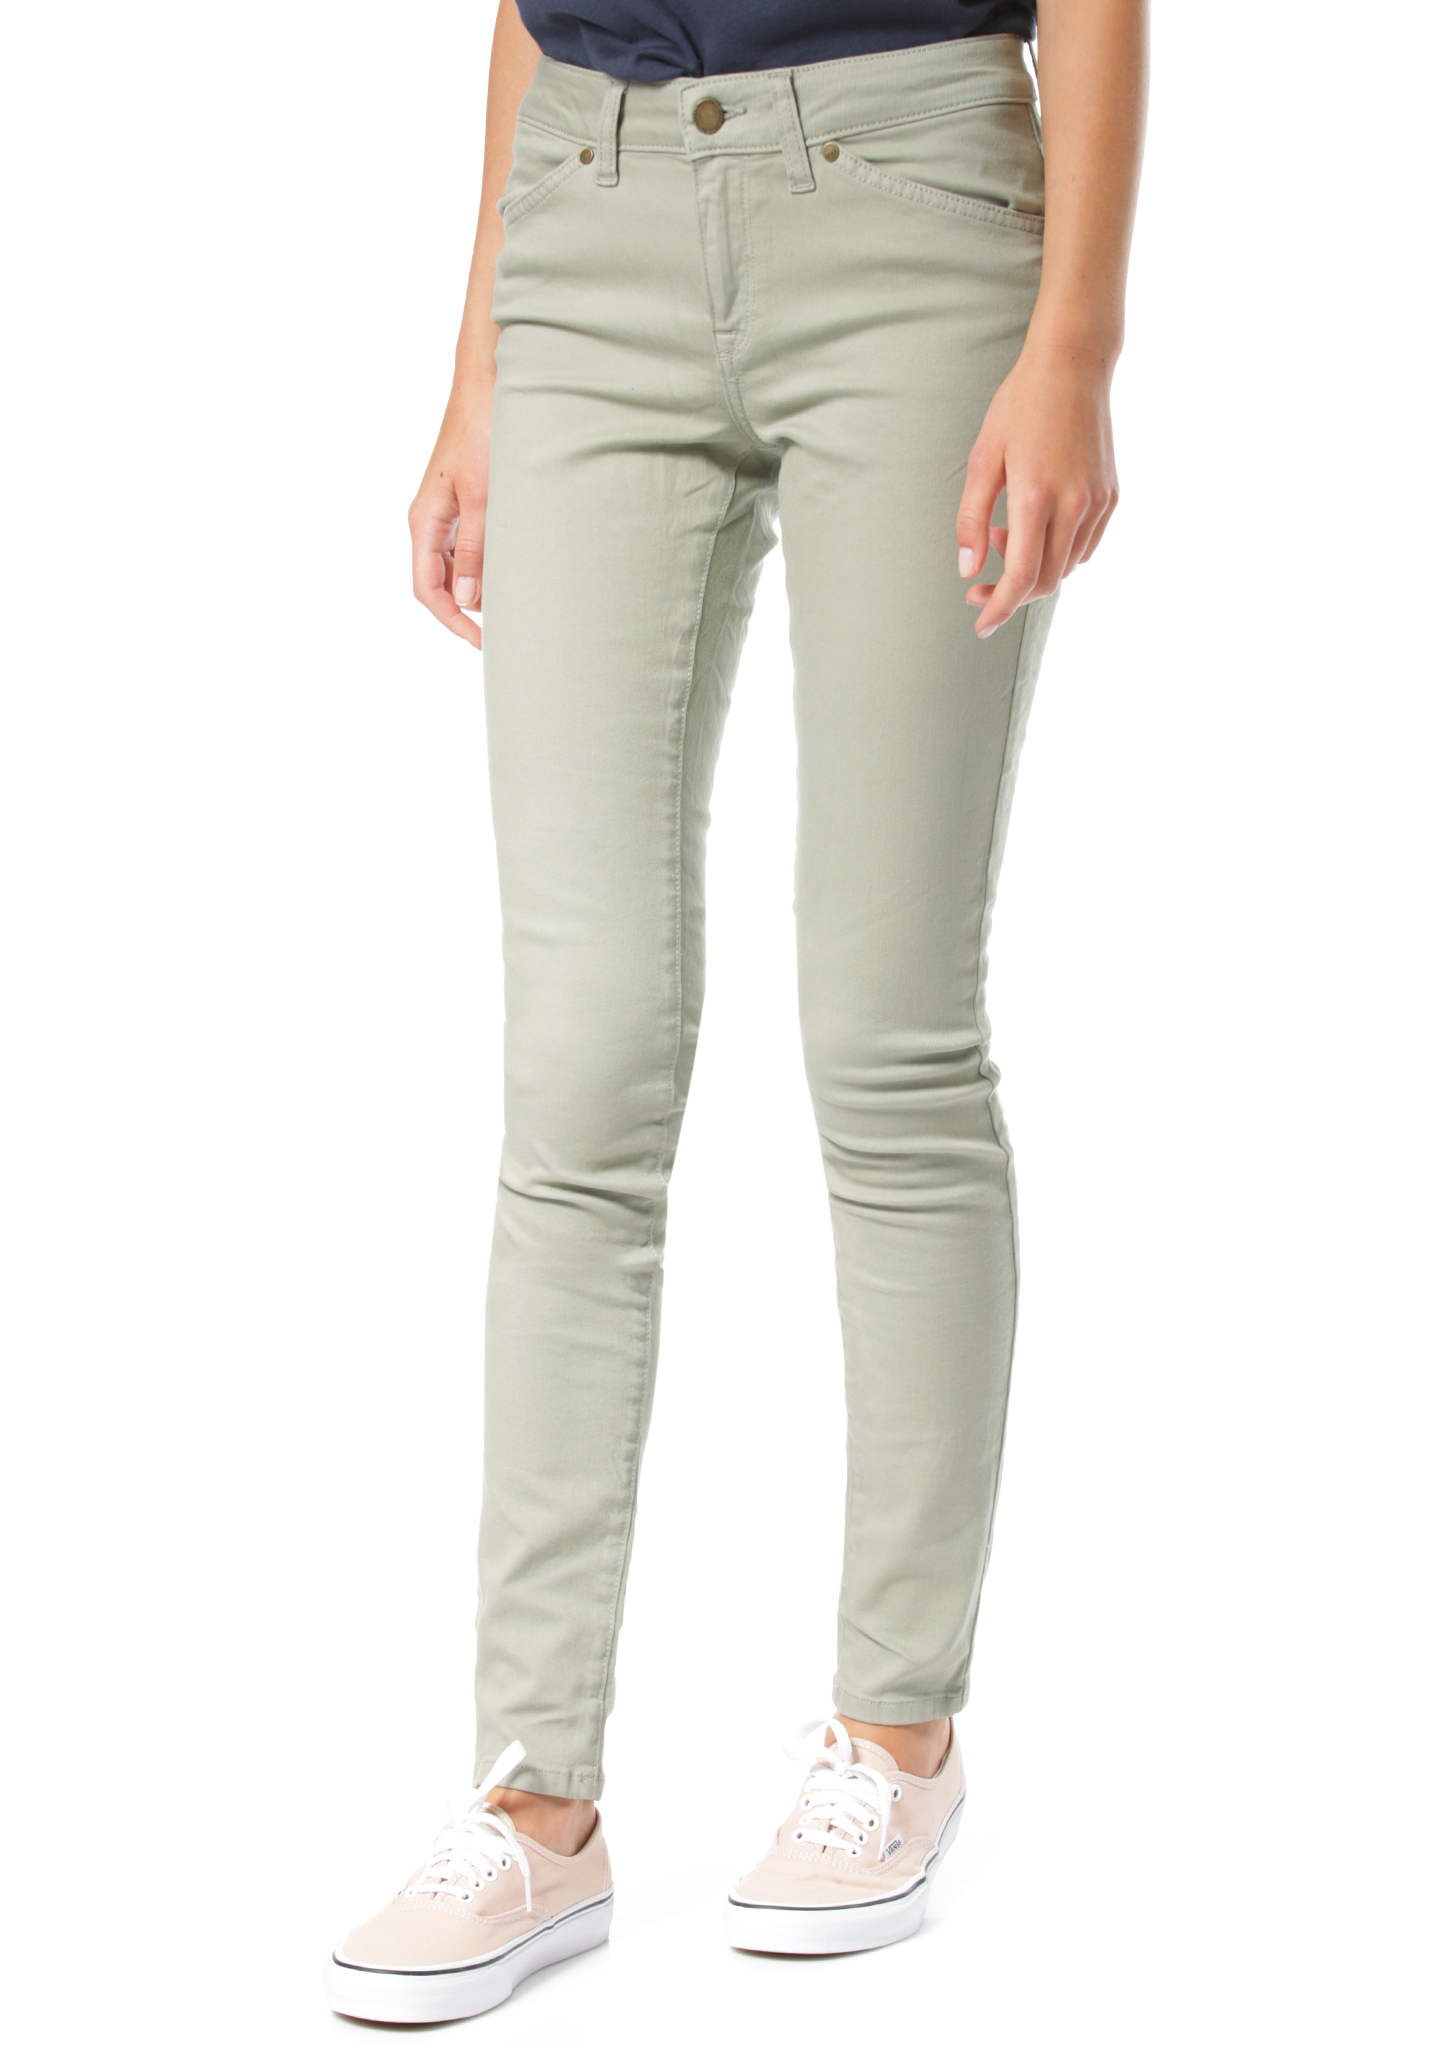 Roxy Stand By You Slim Fit Jeans lily pad 31/XX